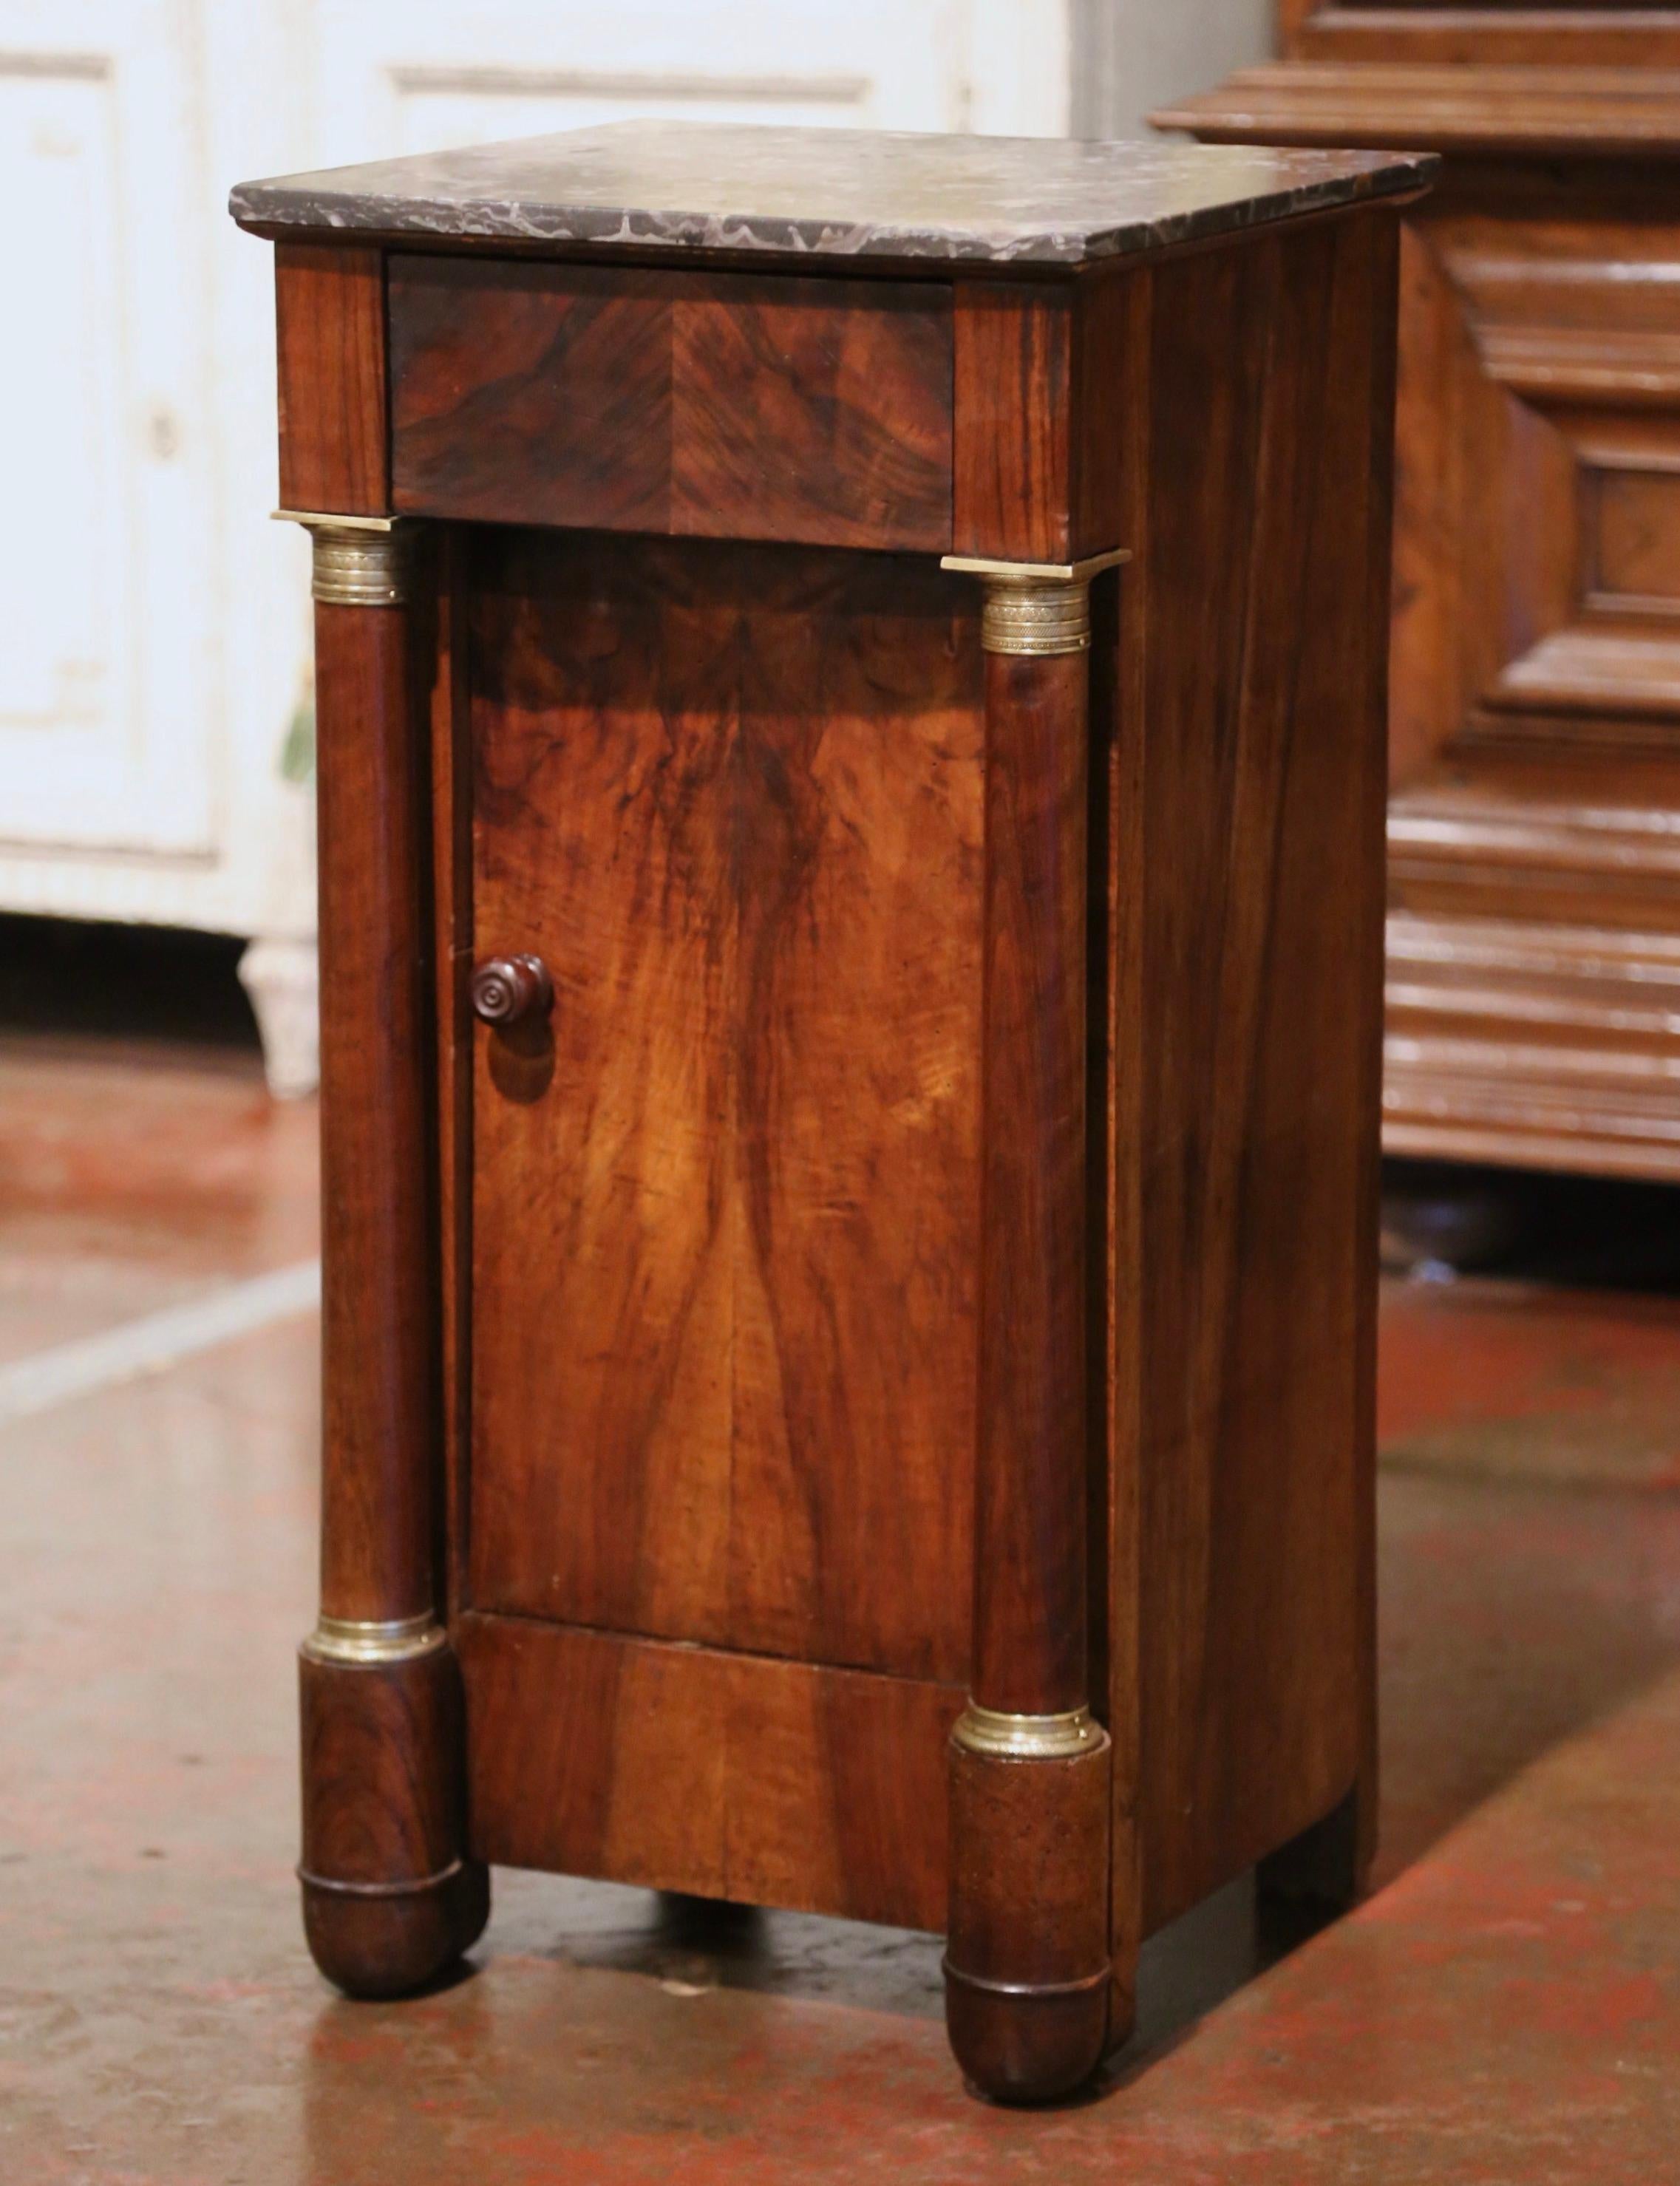 Crafted in France, circa 1870, the elegant antique cabinet stands on front rounded columns ending with bun feet and embellished with decorative brass mounts at the shoulder and the base; the small fruit wood chest features a drawer across the front